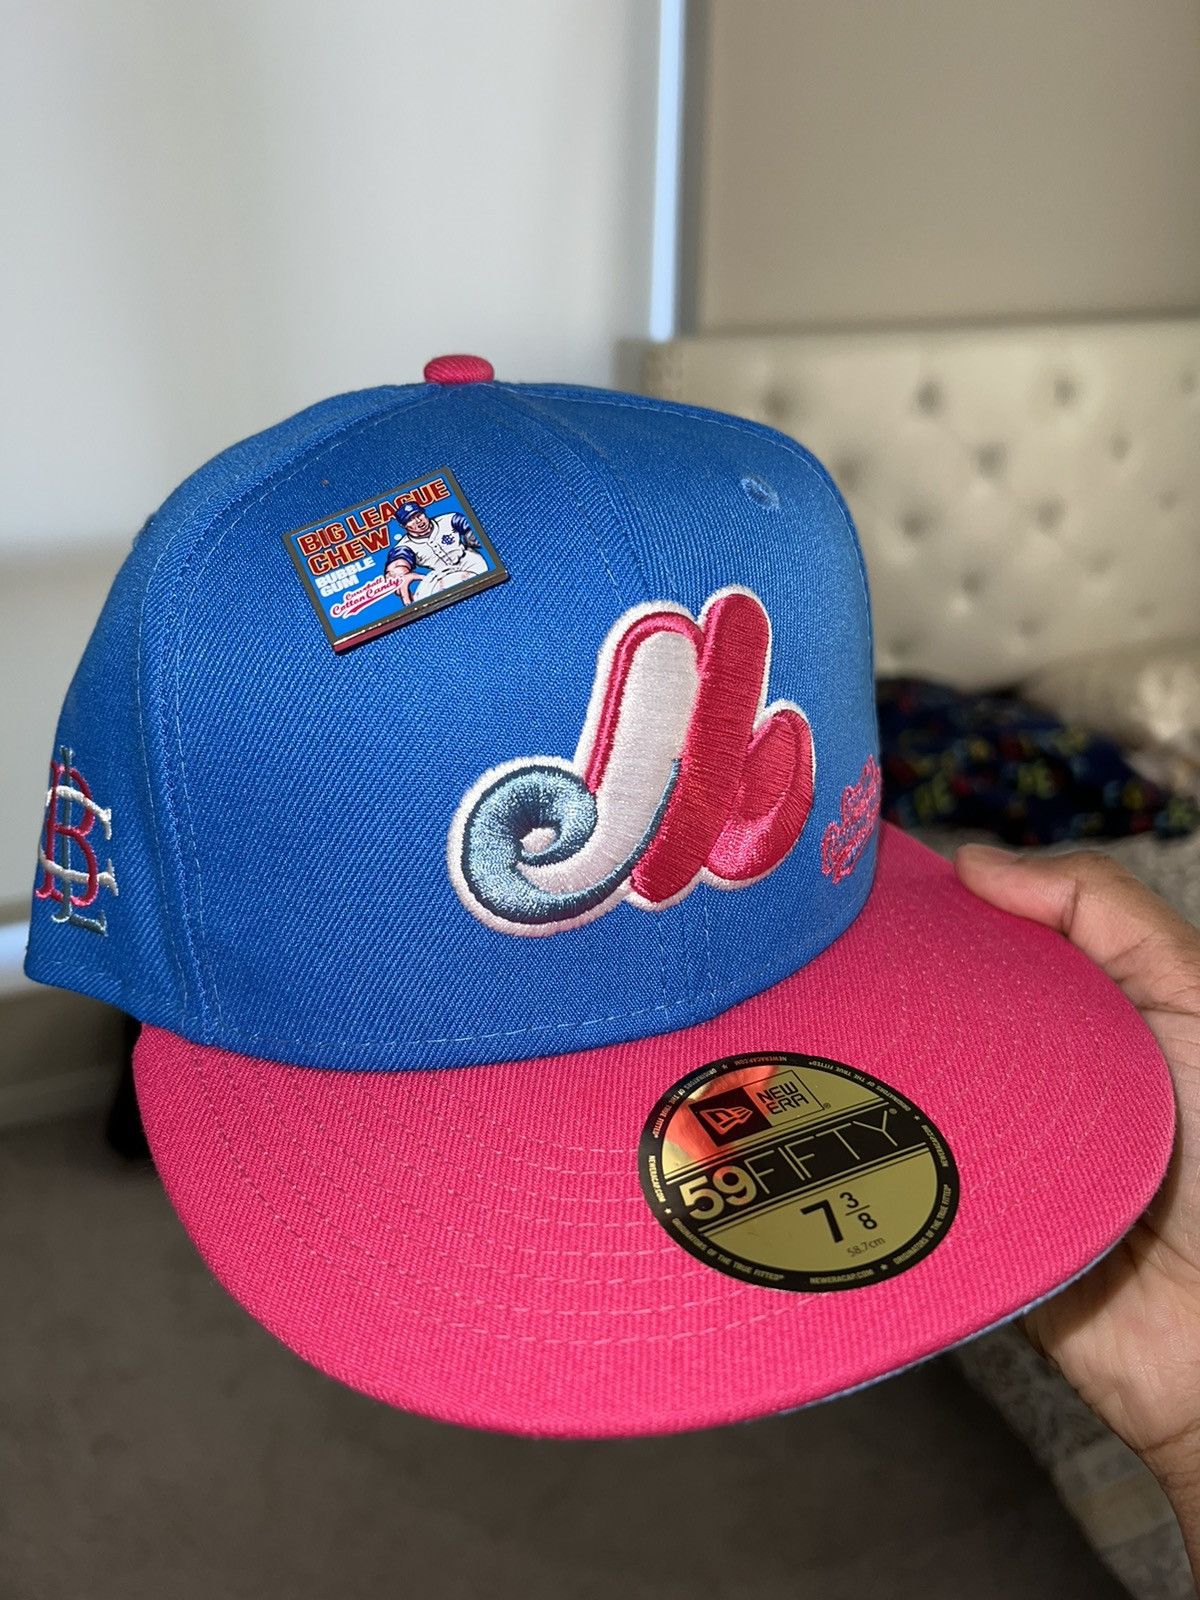 New Era Montreal Expos Hat Fitted 7 3/4 Men Big League Chew Cotton